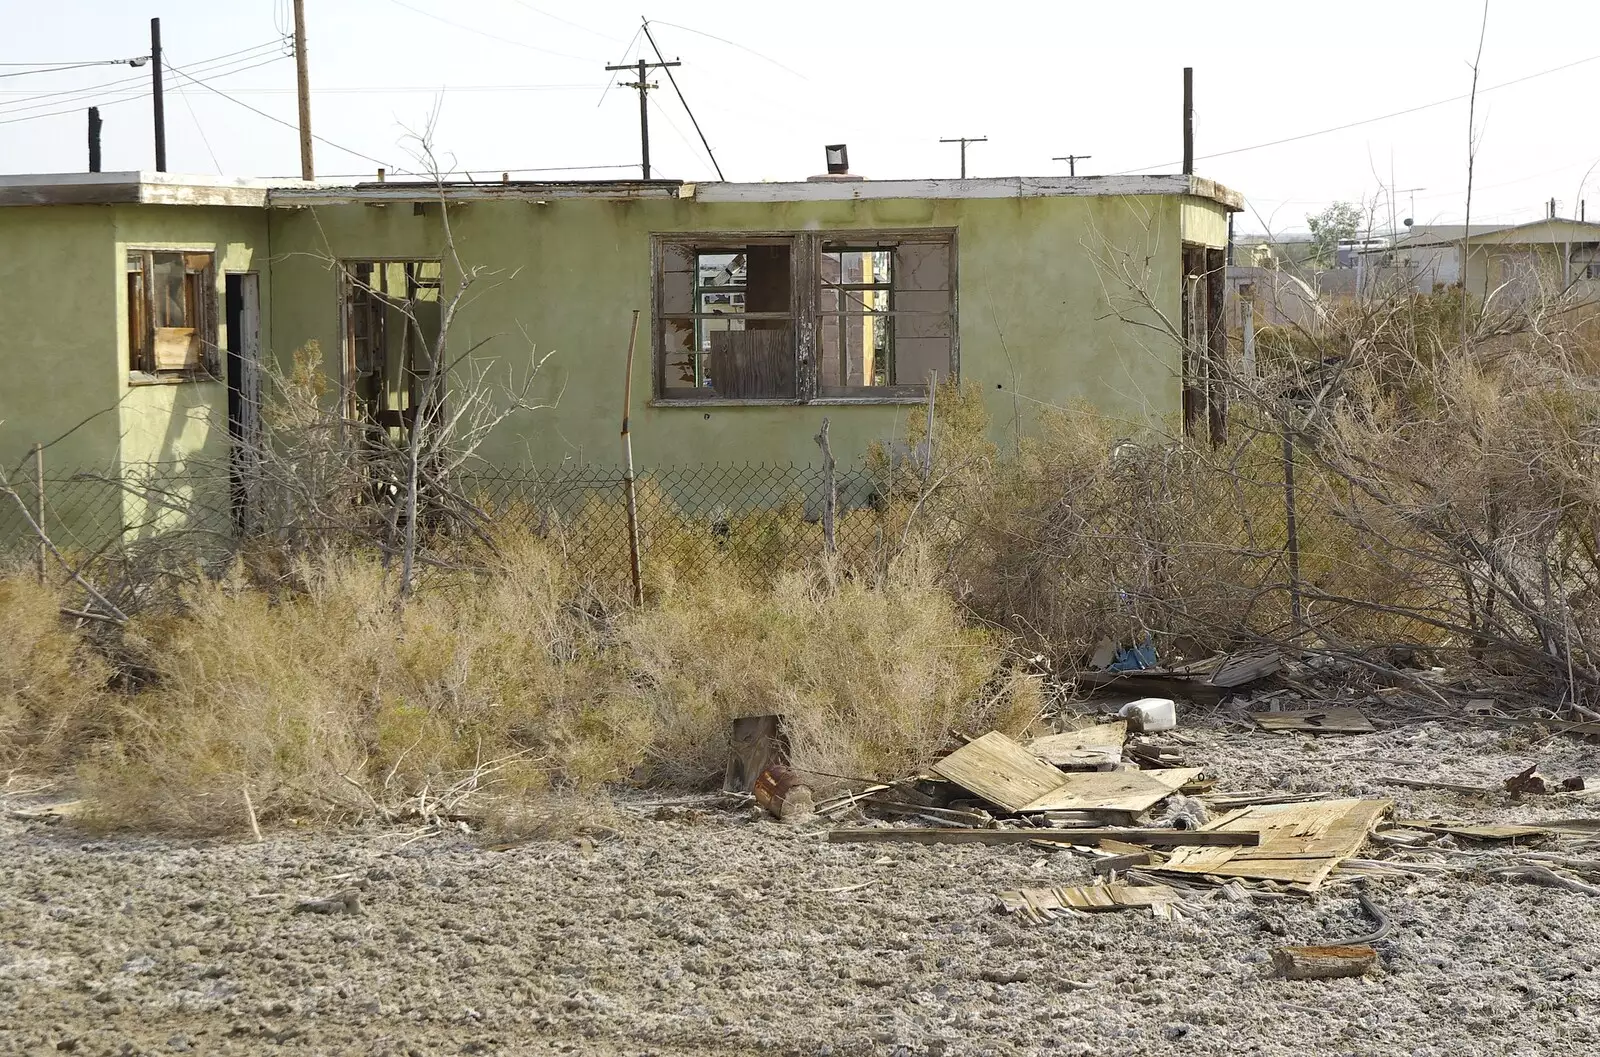 Derelict homes, from The End of the World: Julian to the Salton Sea and Back, California, US - 1st March 2008